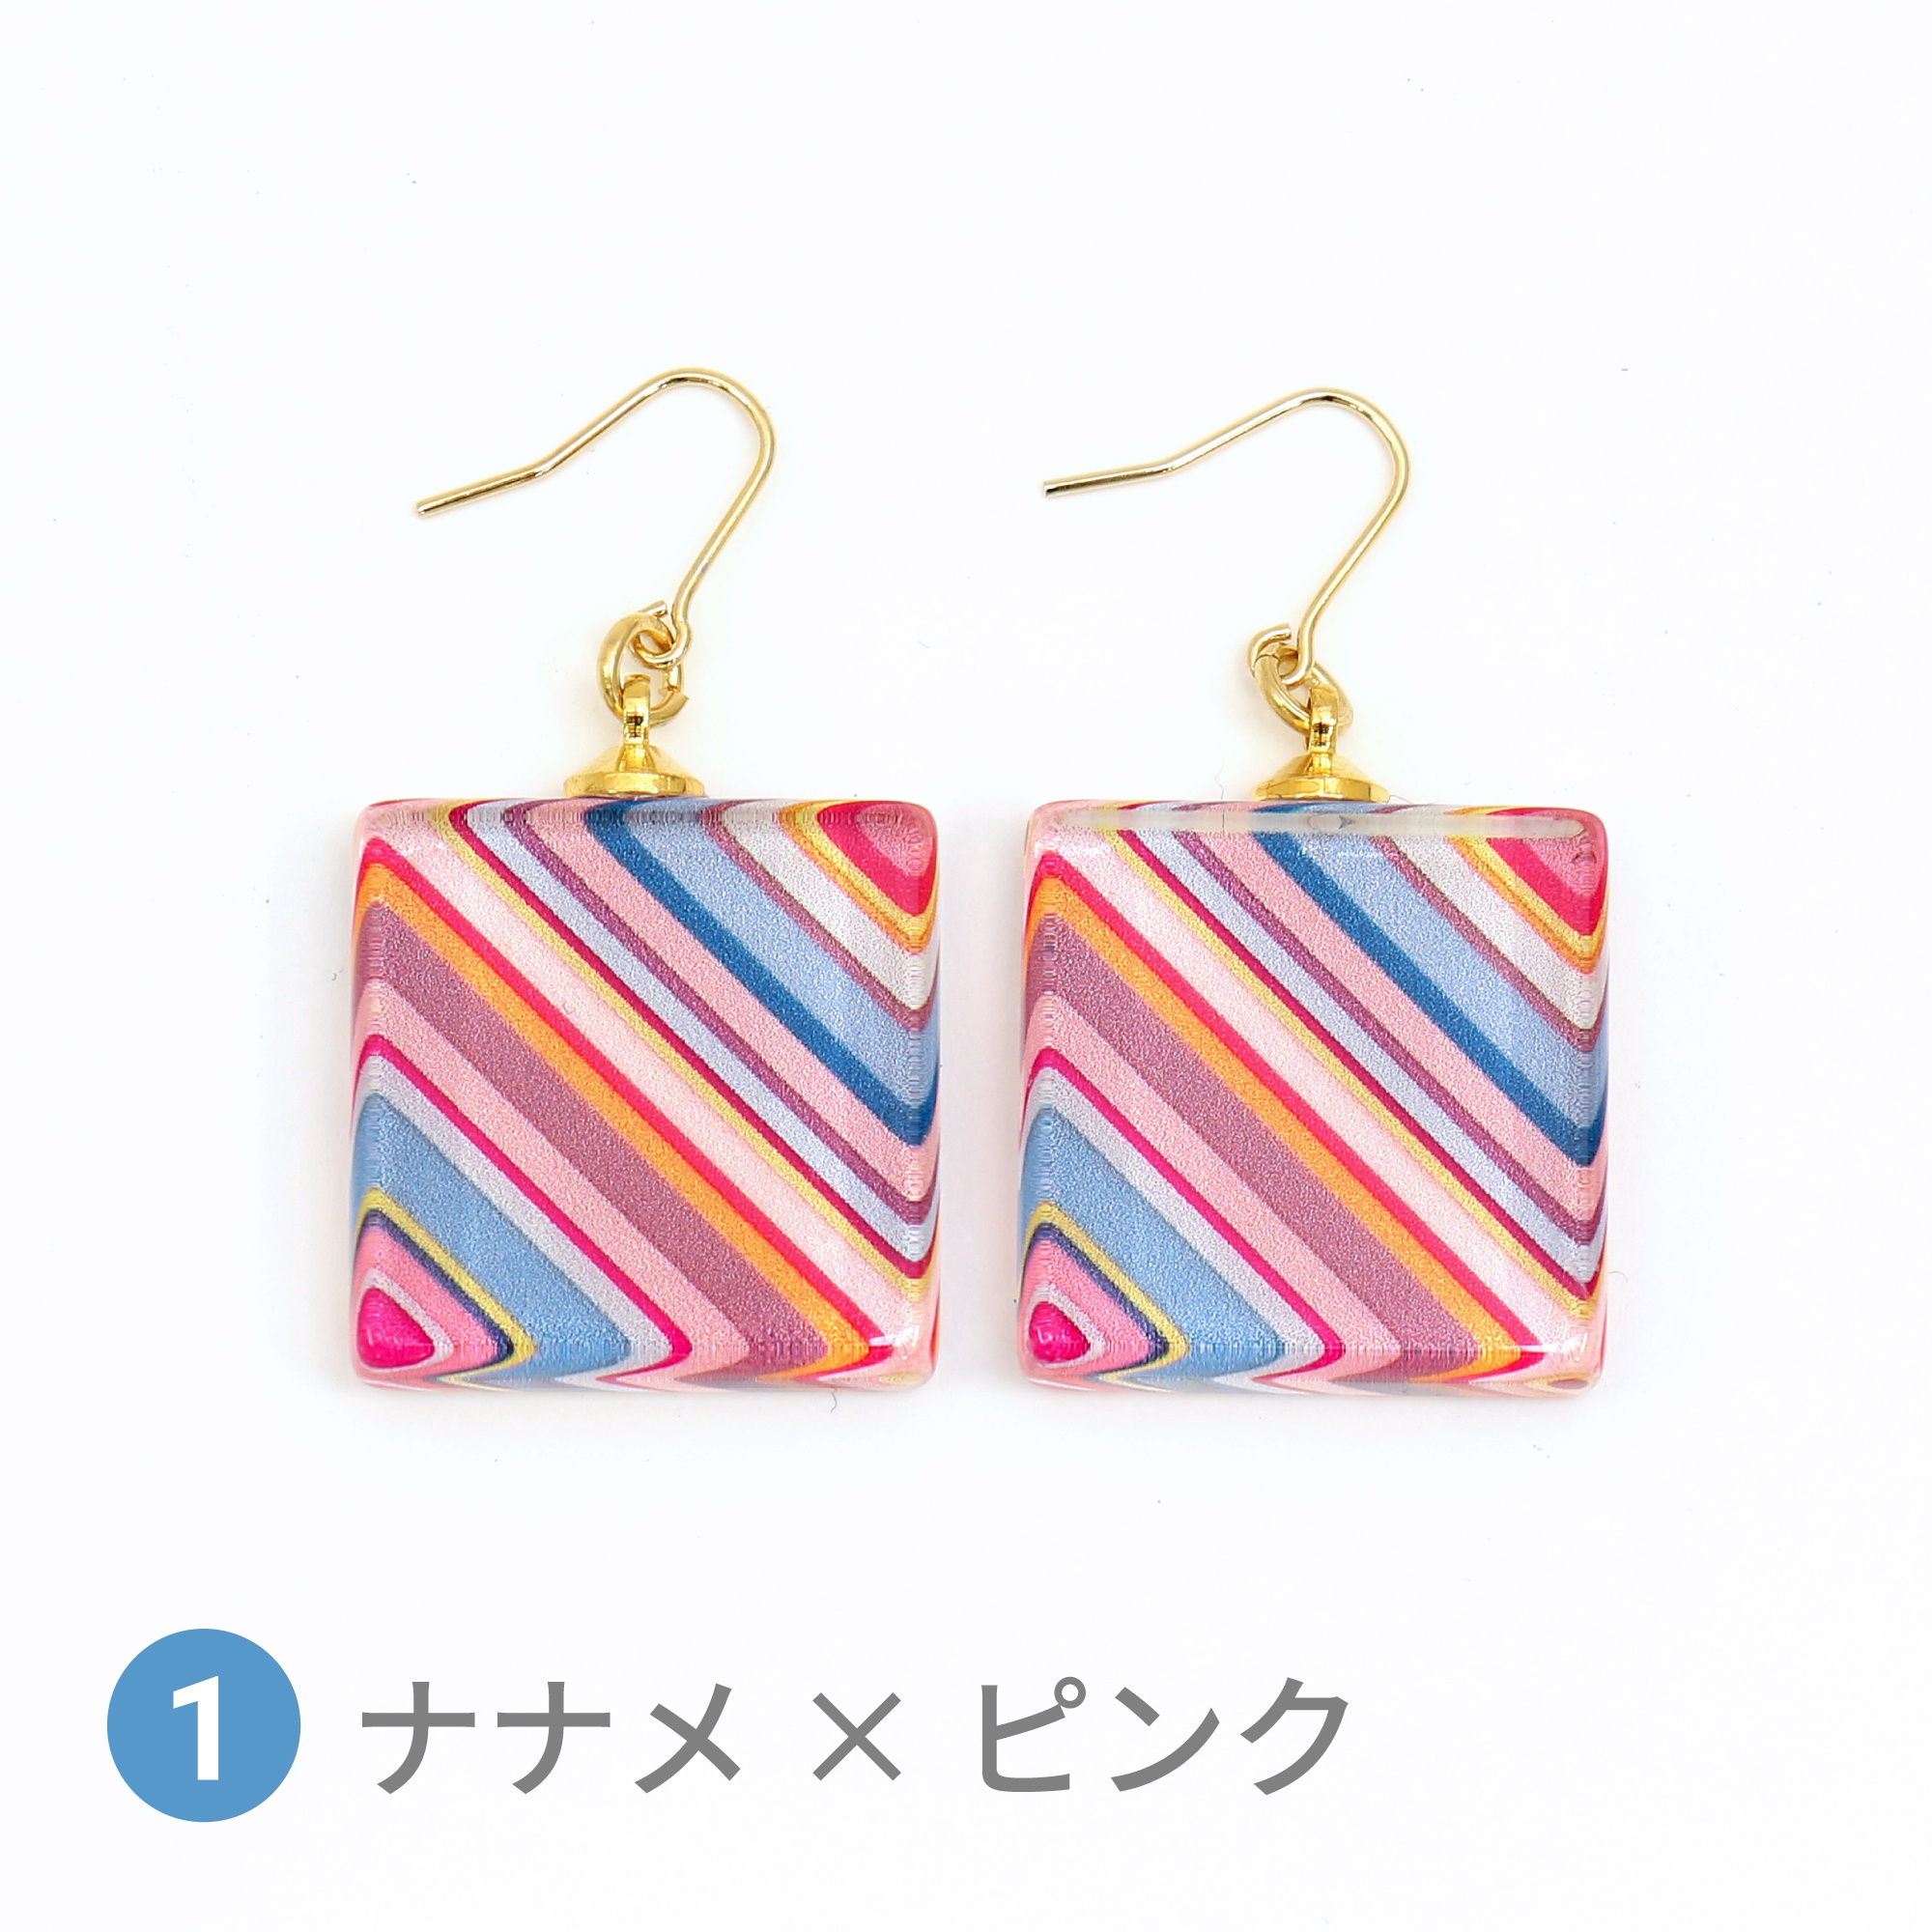 Glass accessories Pierced Earring SPEED diagonal&pink square shape